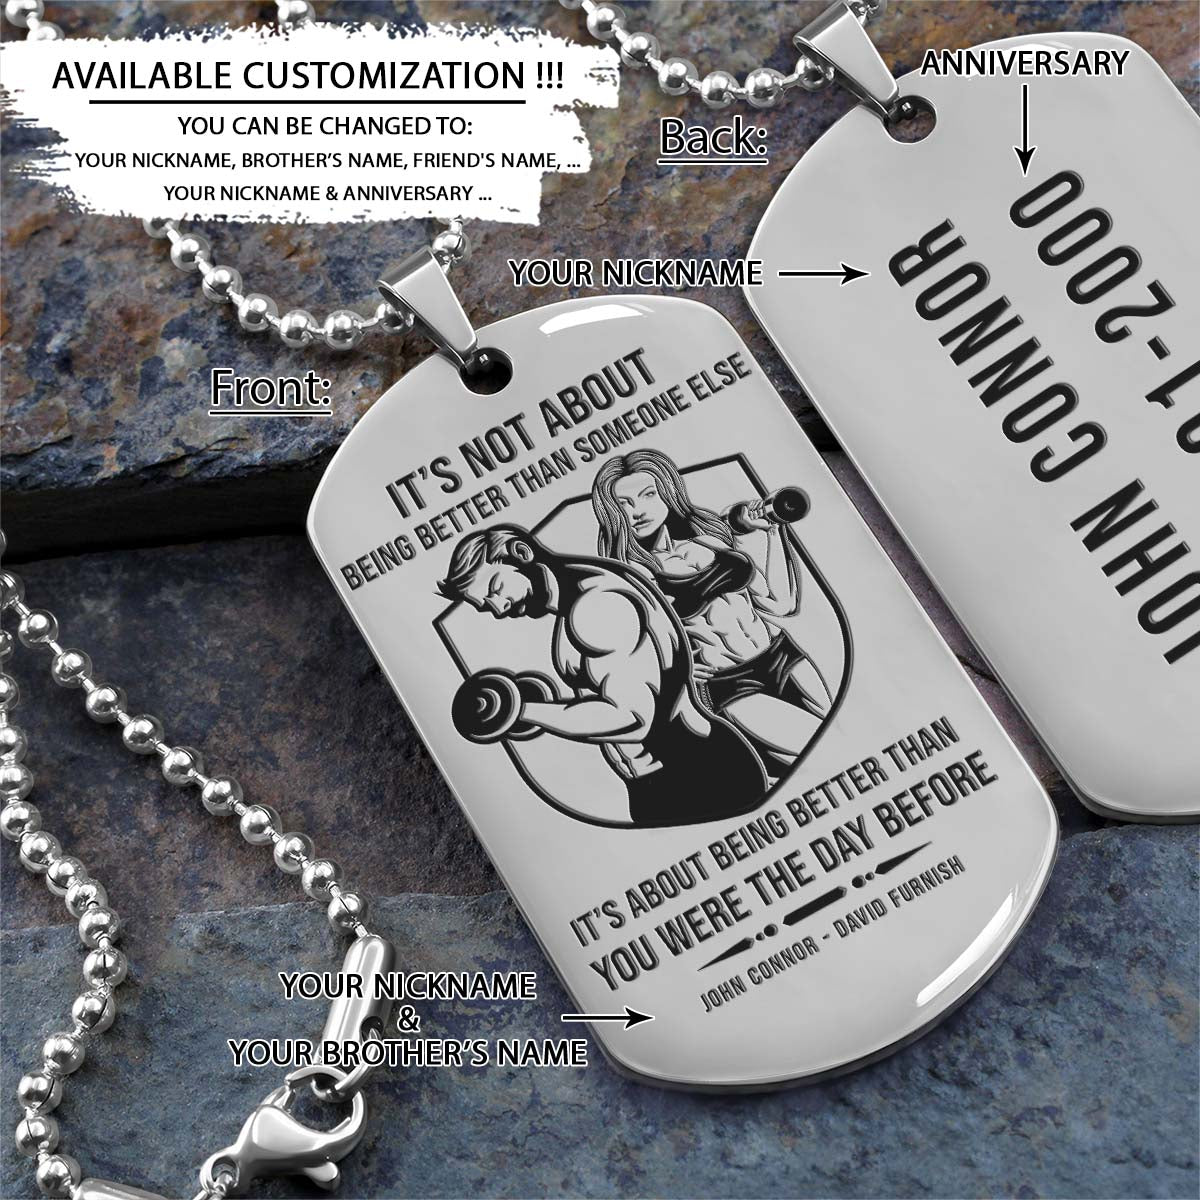 It's About Being Better Than You Were The Day Before - Gym - Fitness Center - Workout - Gym Dog Tag - Gym Necklace - Engrave Dog Tag